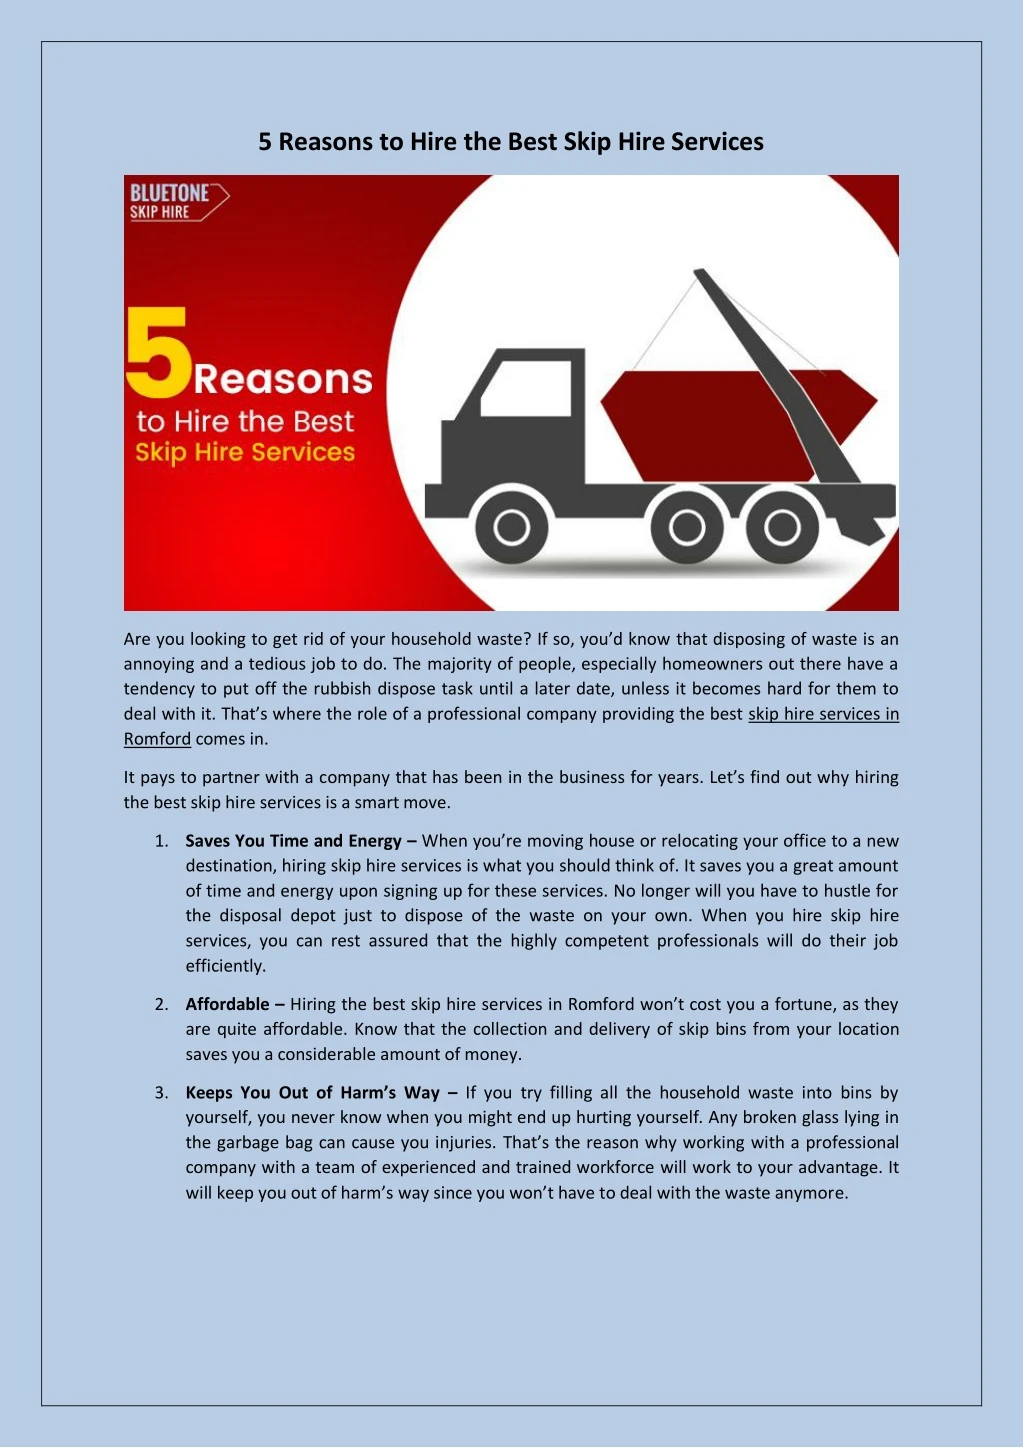 5 reasons to hire the best skip hire services